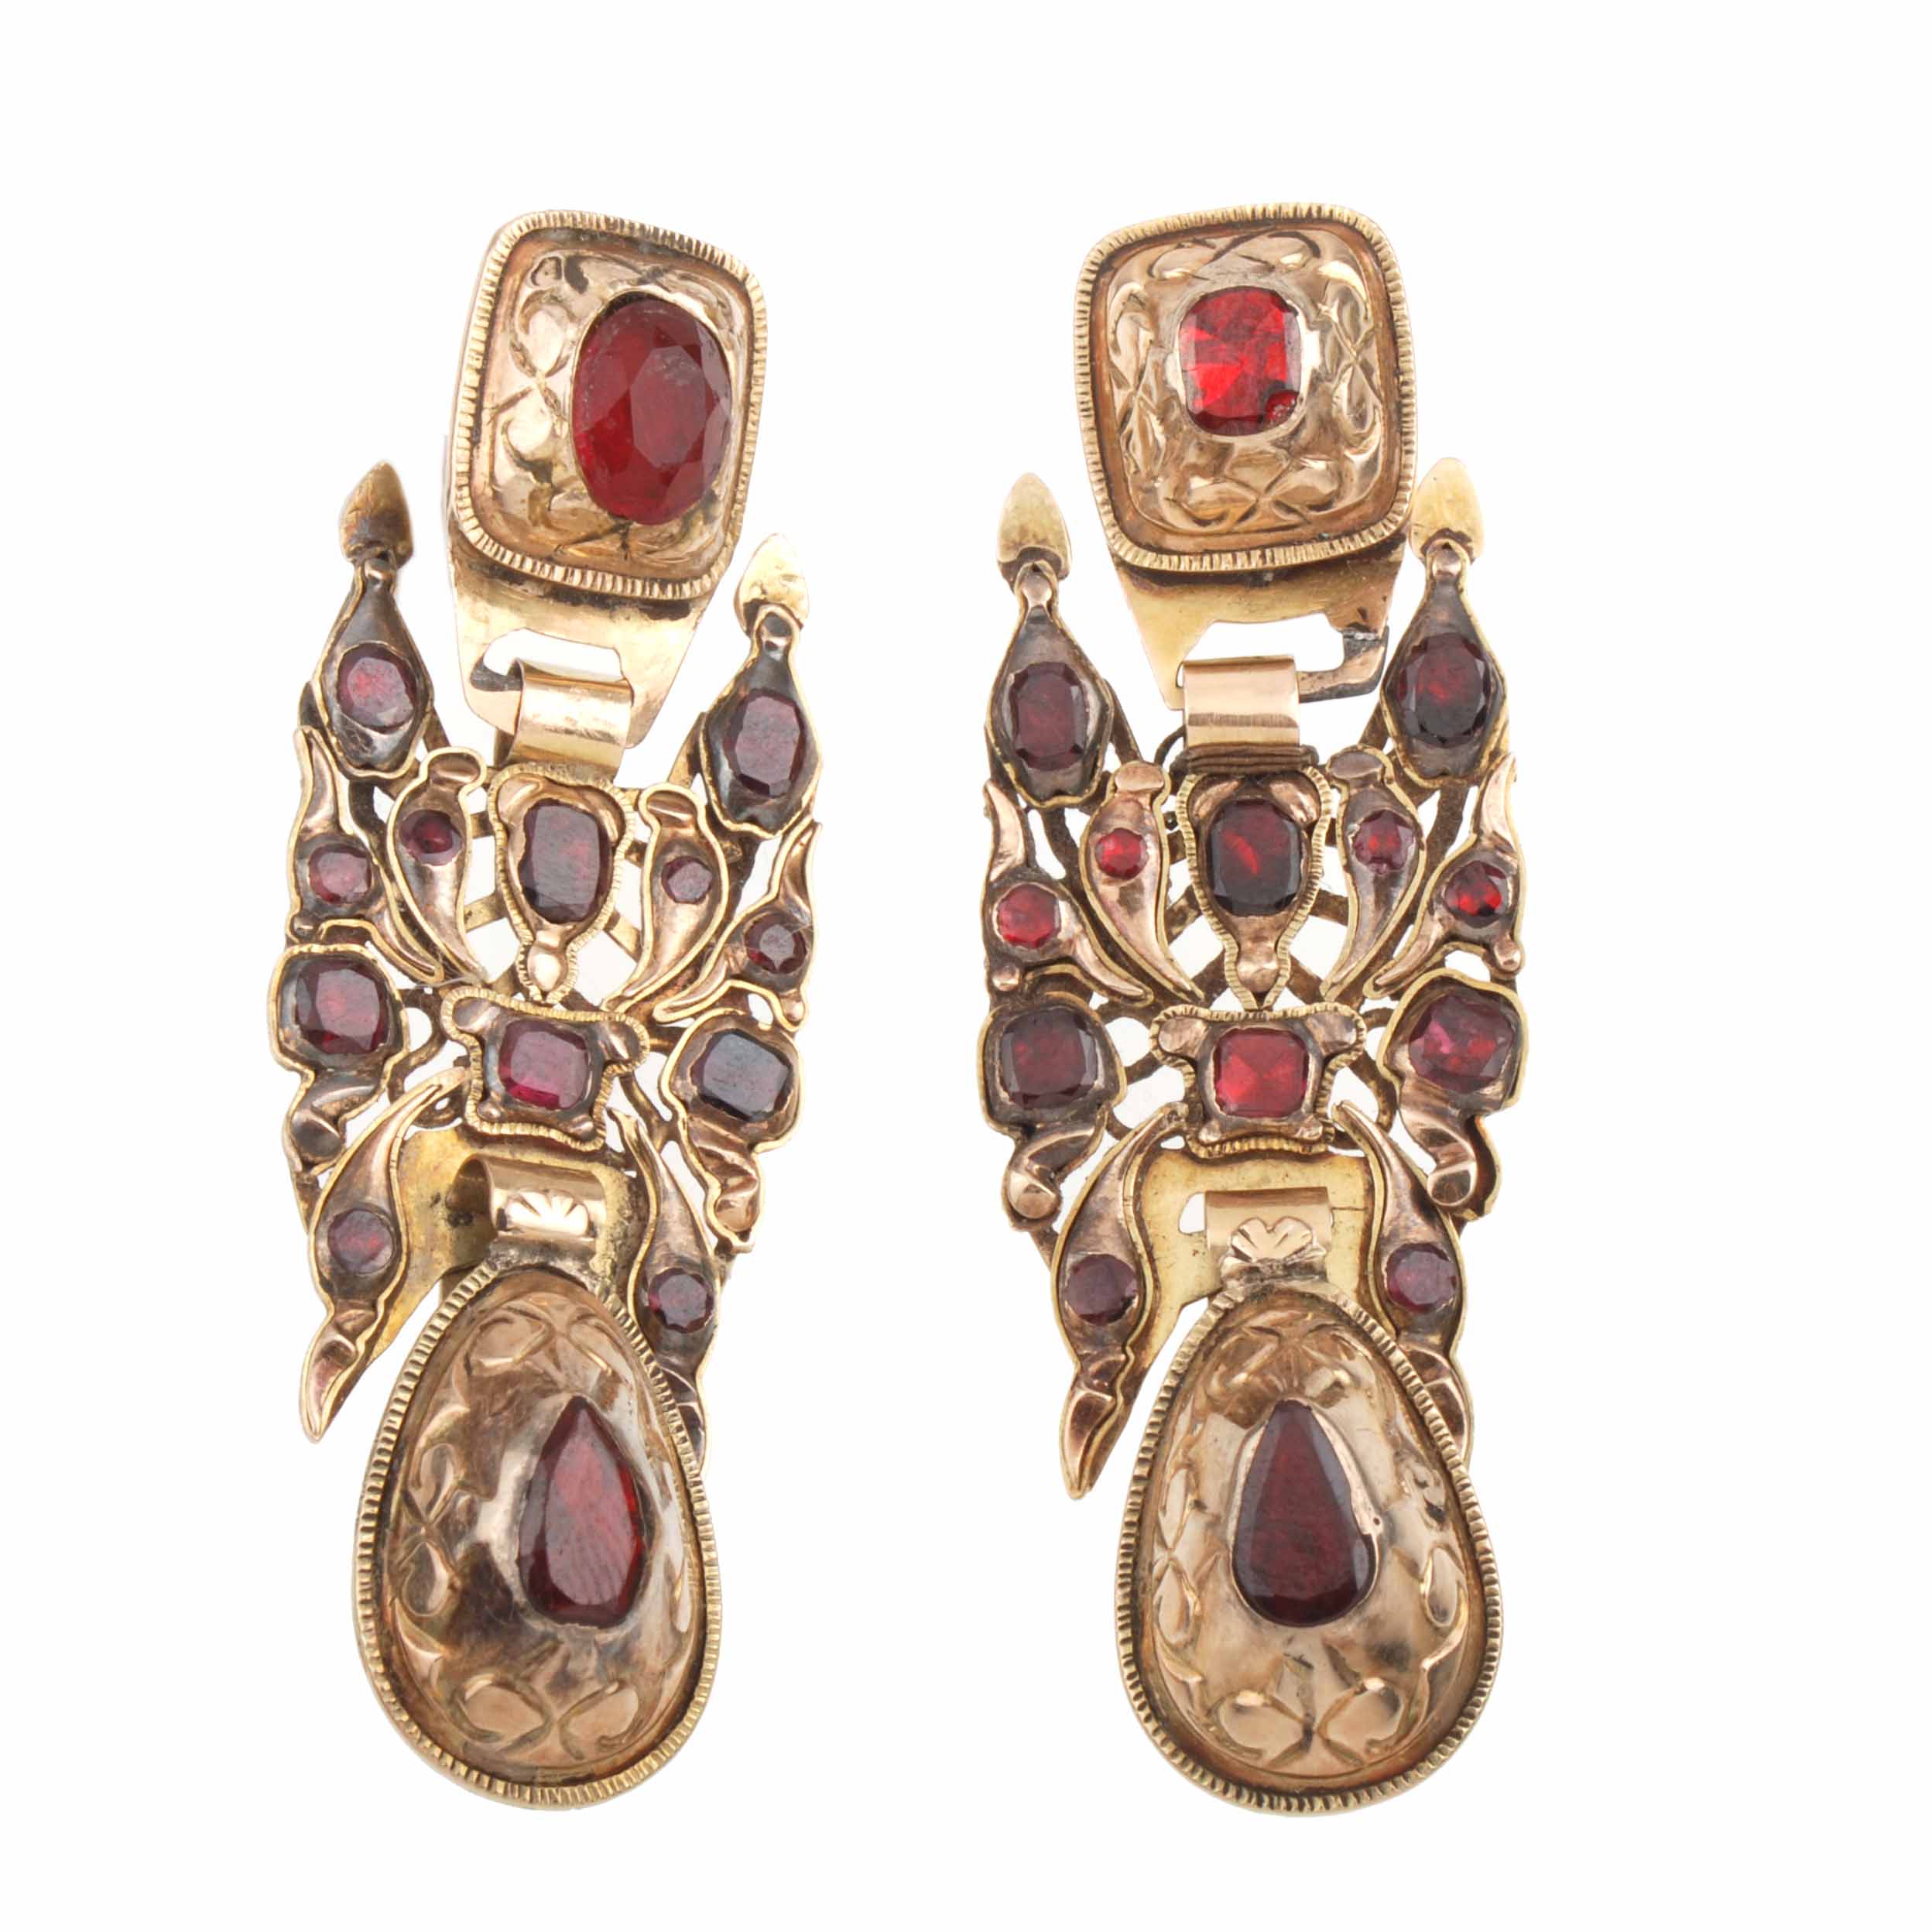 CATALAN GOLD AND GARNETS EARRINGS, 19TH CENTURY.